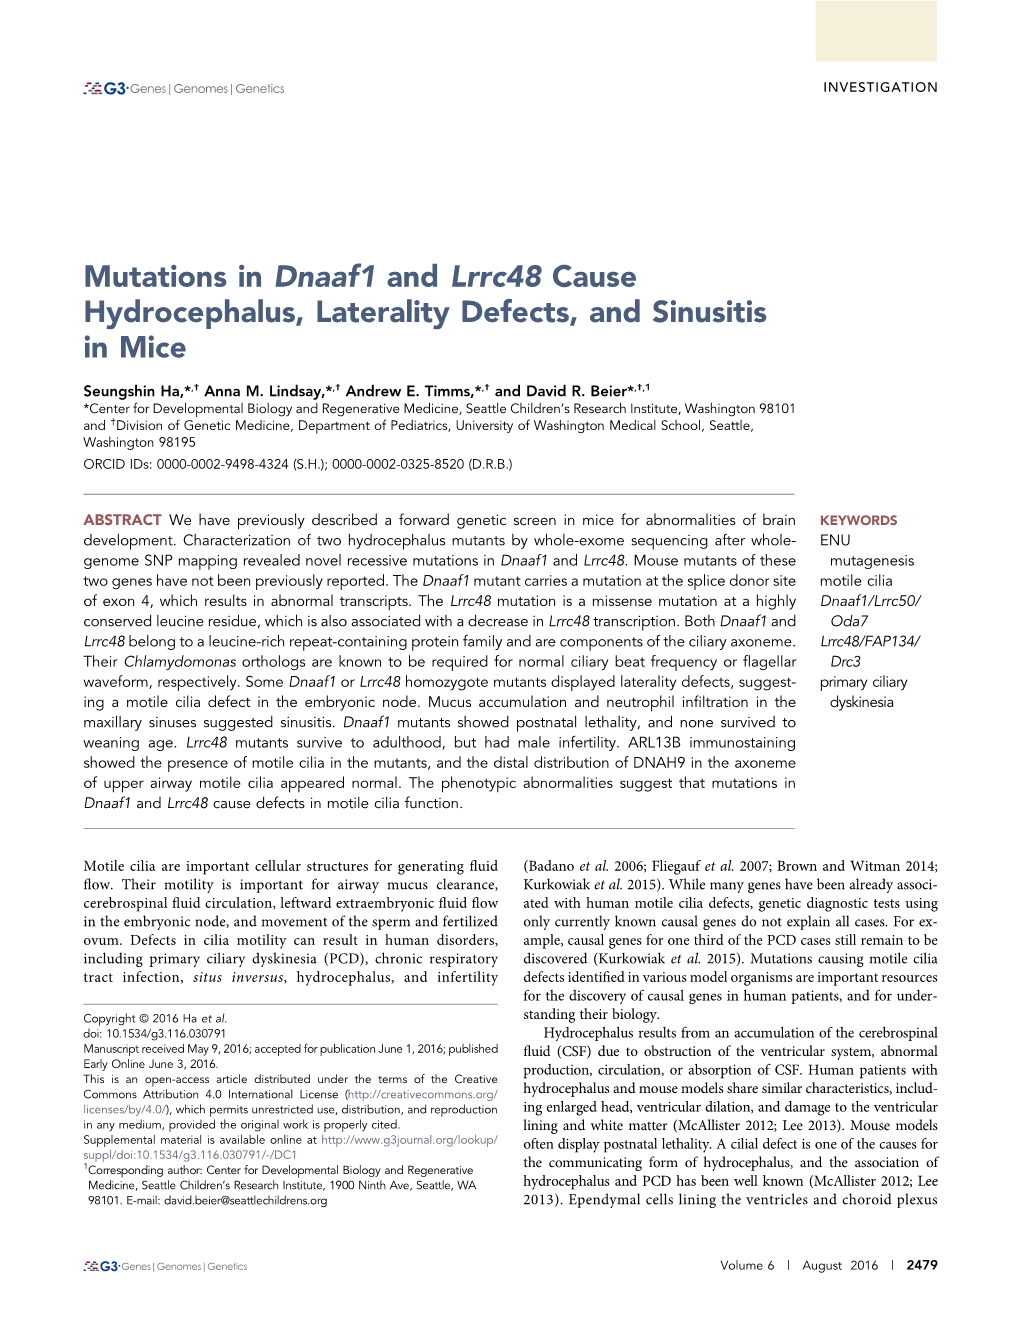 Mutations in Dnaaf1 and Lrrc48 Cause Hydrocephalus, Laterality Defects, and Sinusitis in Mice